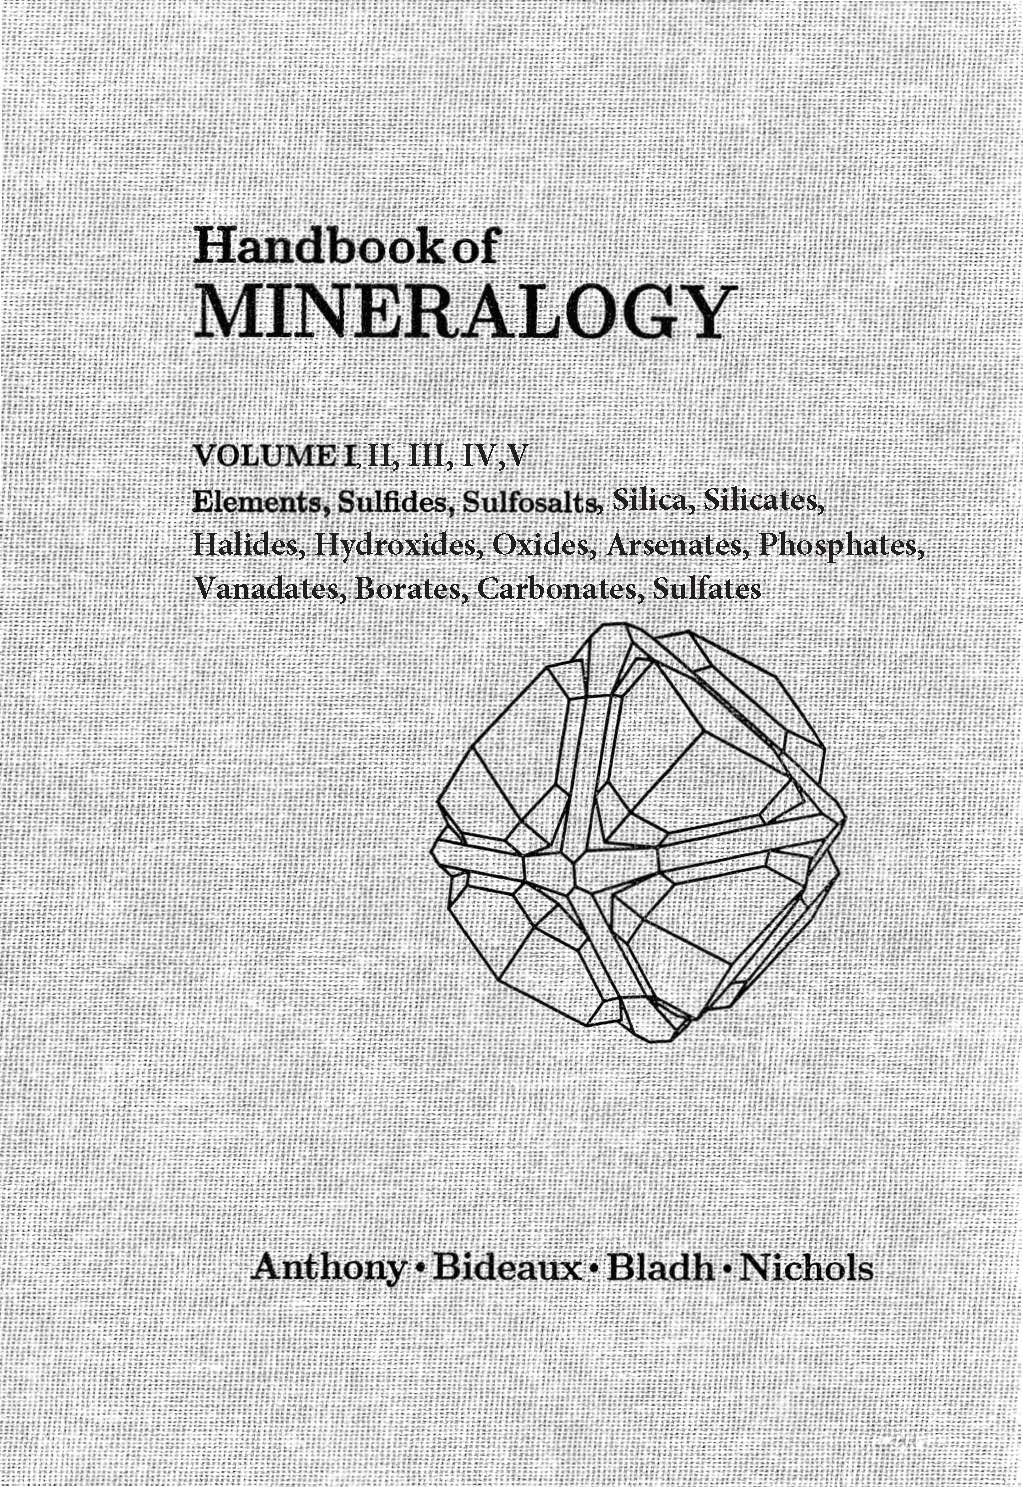 Cover of Handbook of Mineralogy